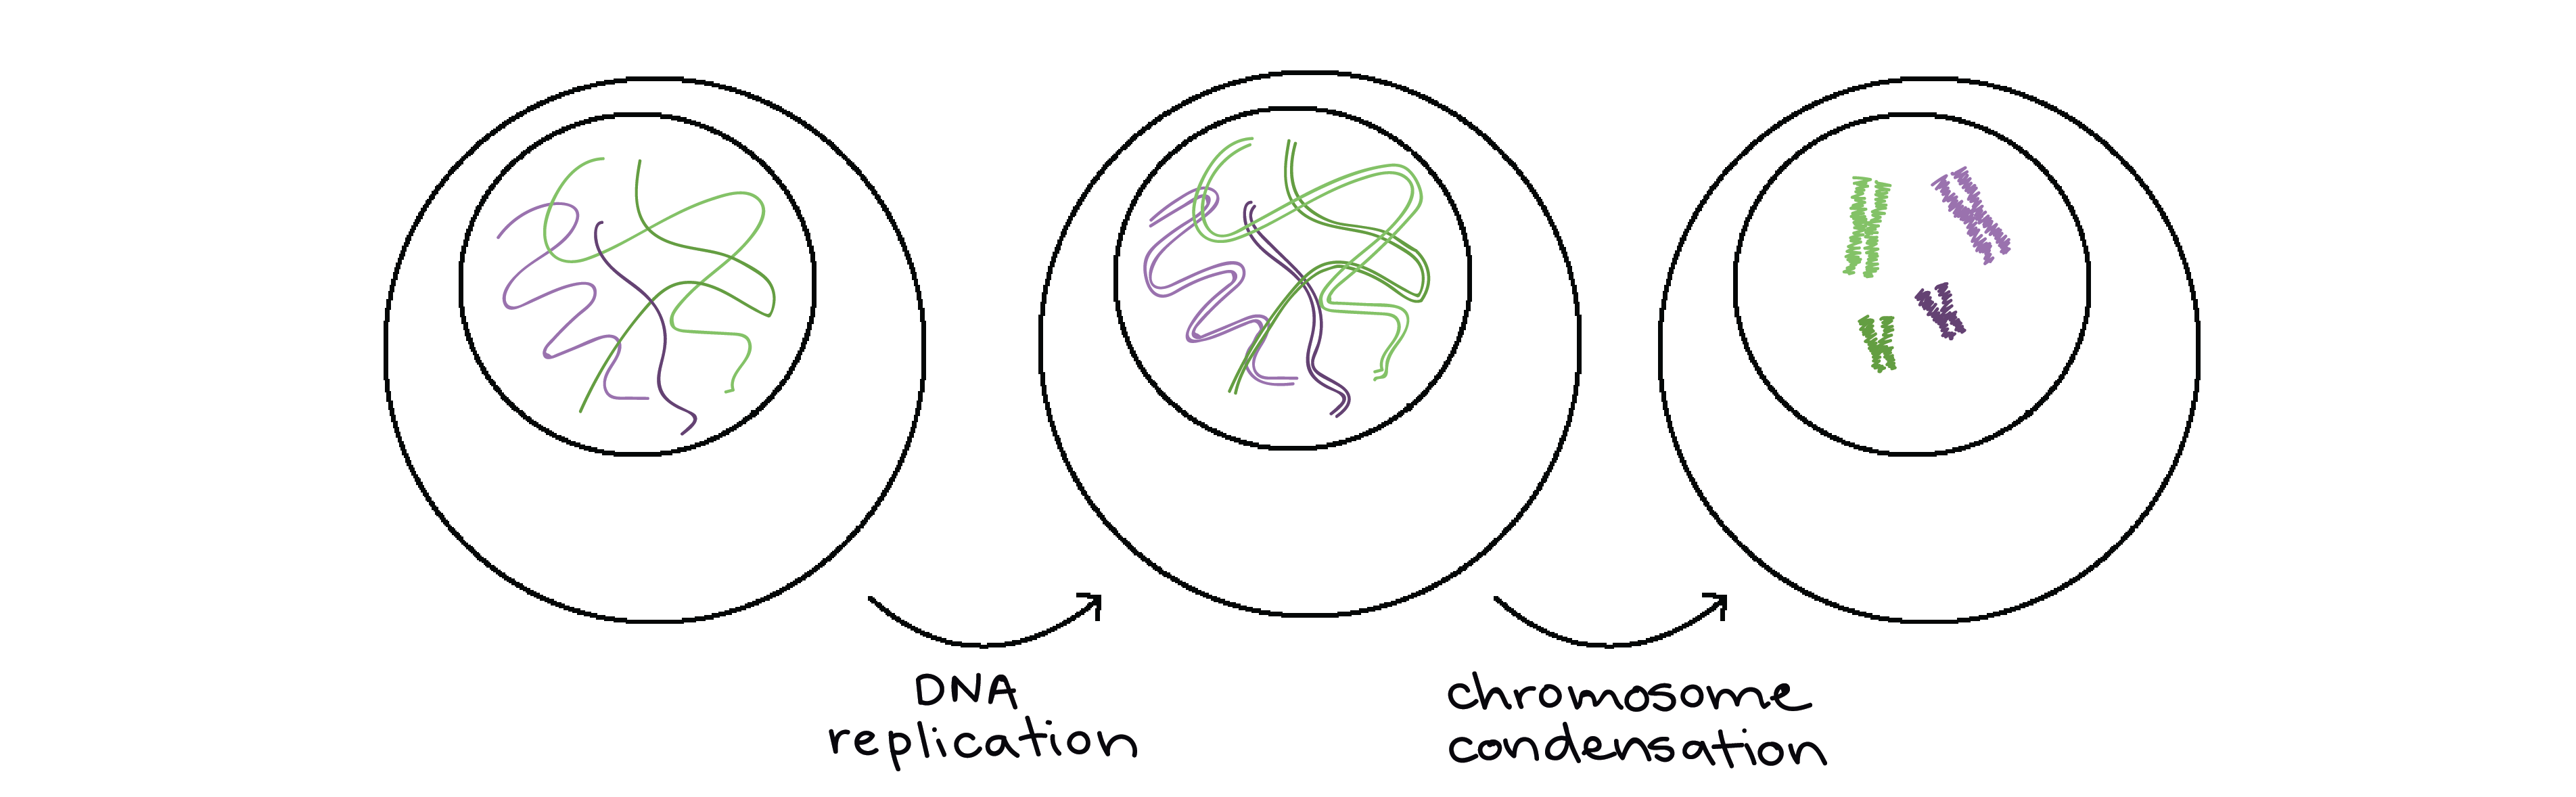 DNA replication and condensation